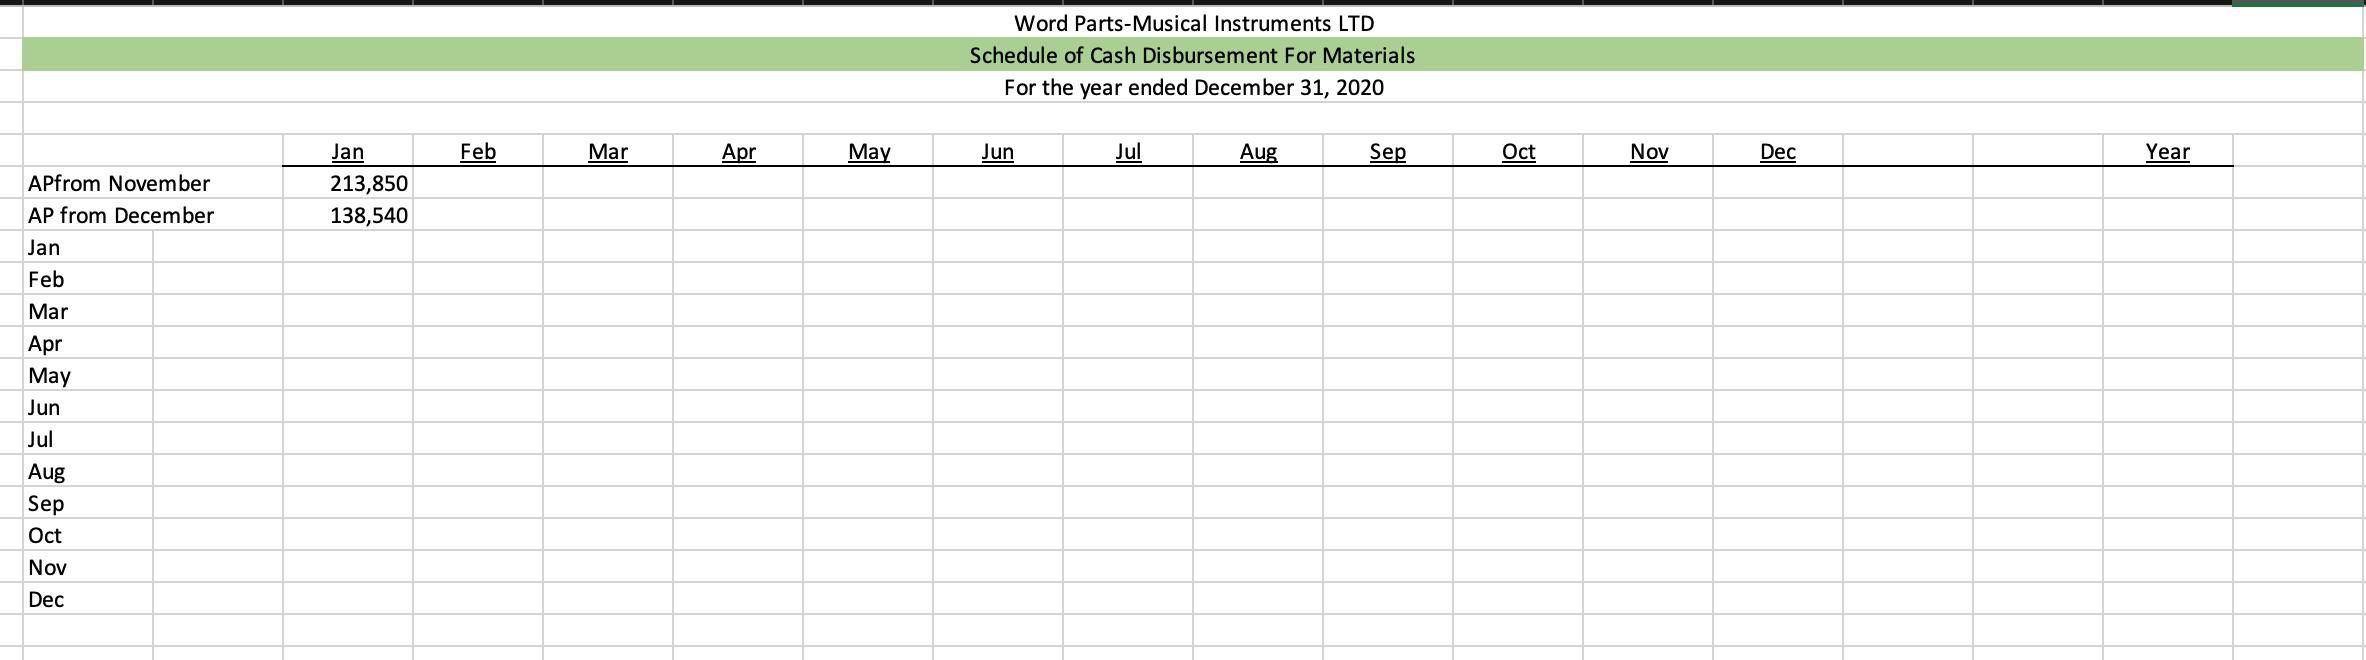 Word Parts-Musical Instruments LTD Schedule of Cash Disbursement For Materials For the year ended December 31, 2020 Feb Mar A